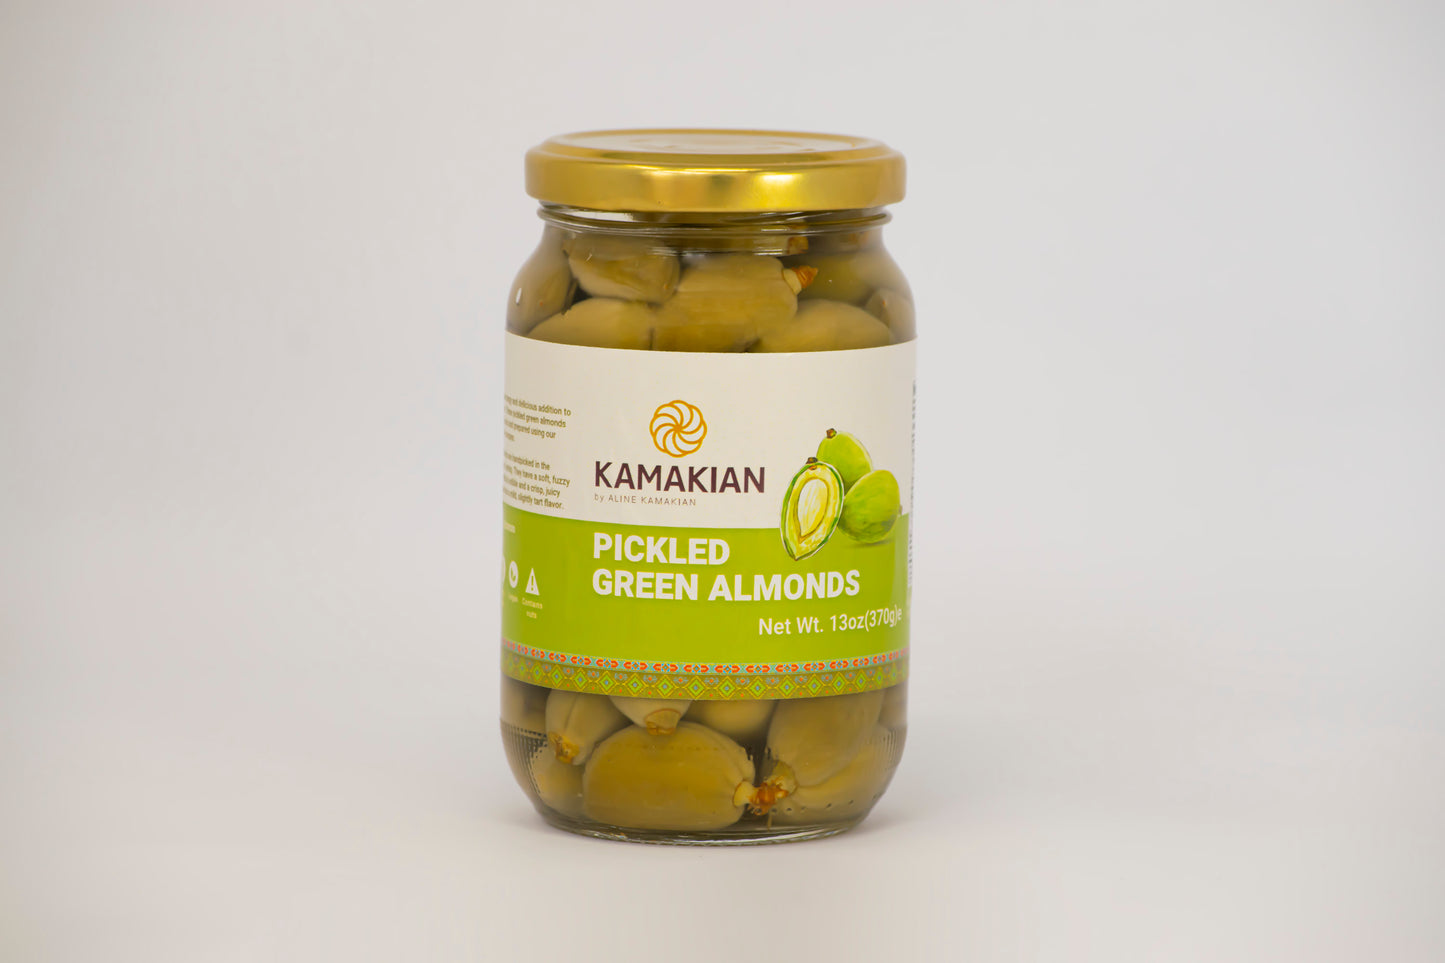 Pickled Green Almonds made in Lebanon